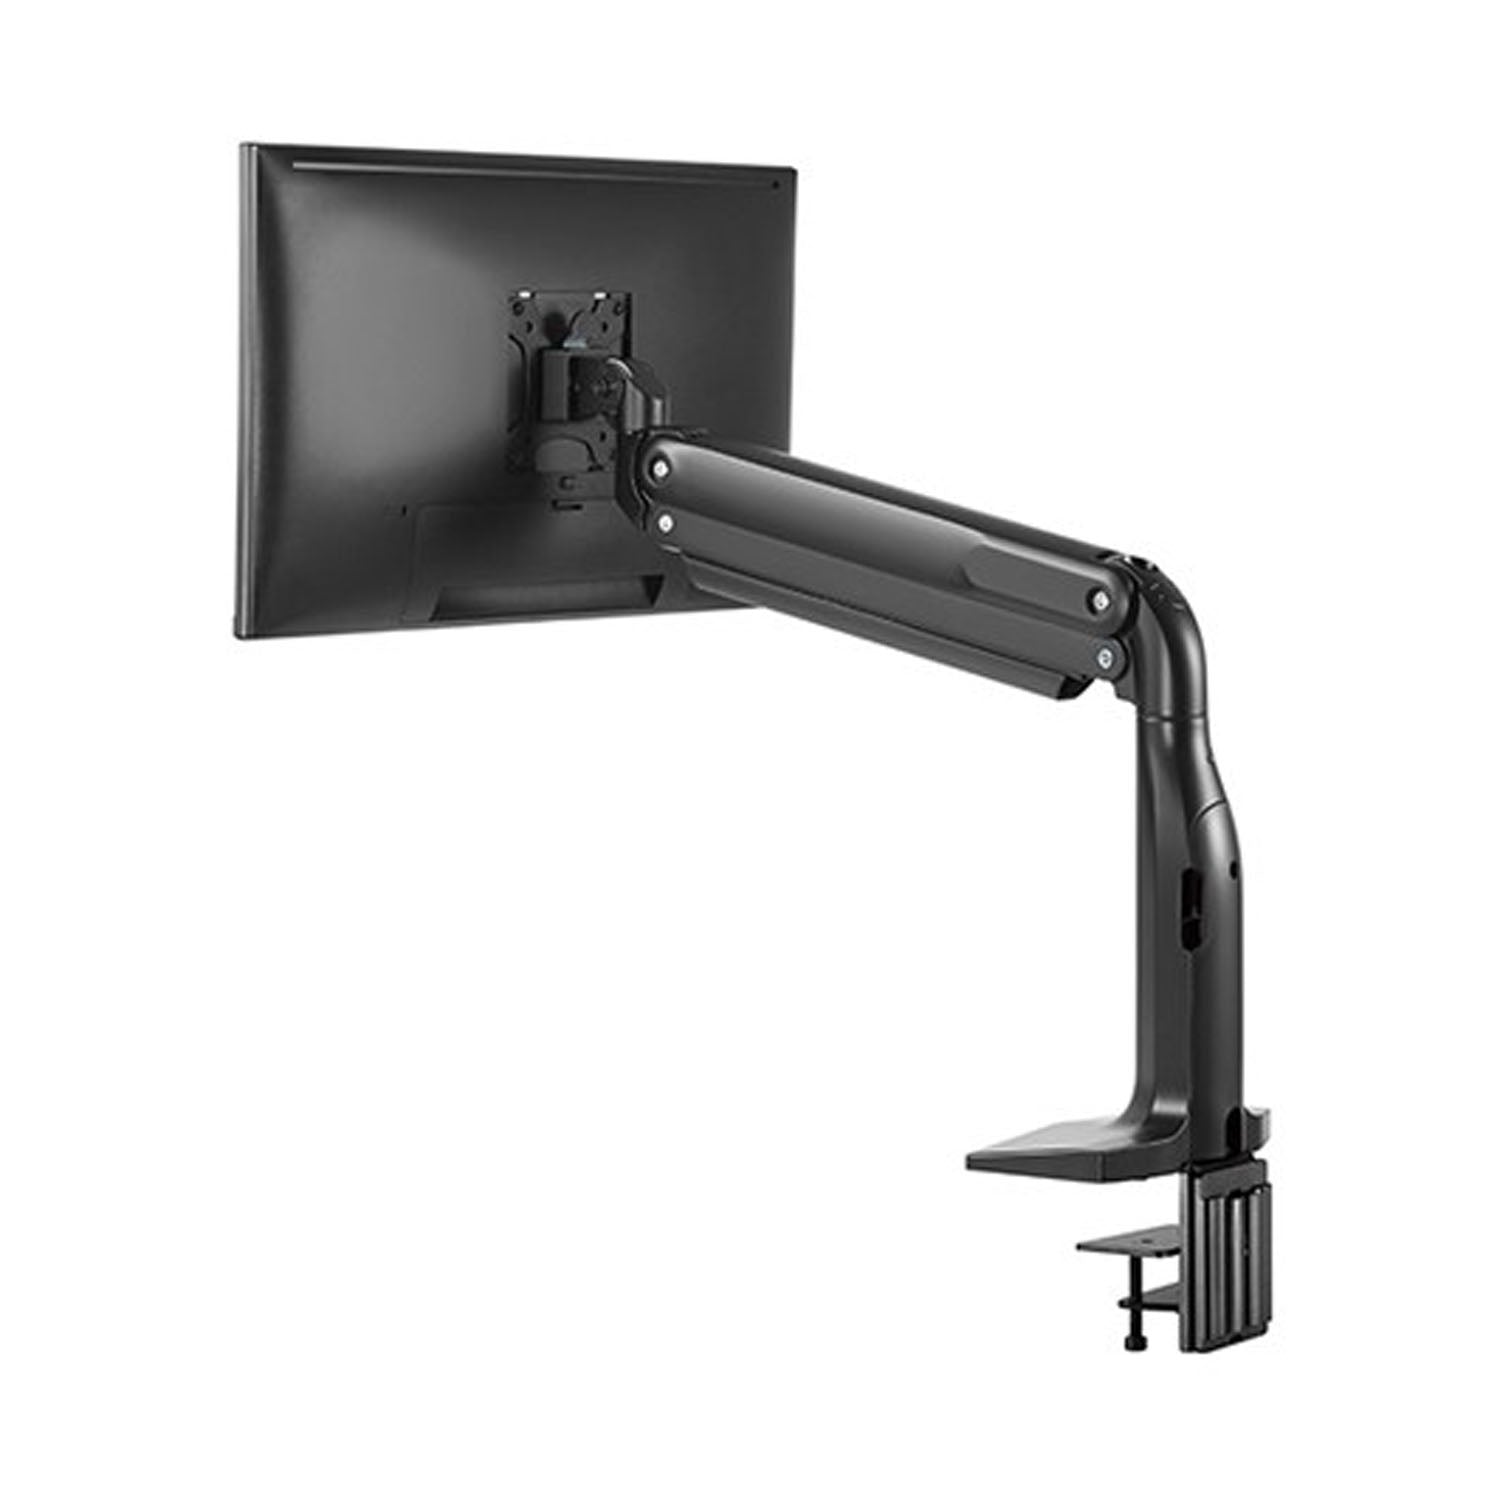 Gadgeton Versatile Single Monitor Arm, Stand And Mount For Gaming And Office Use 17